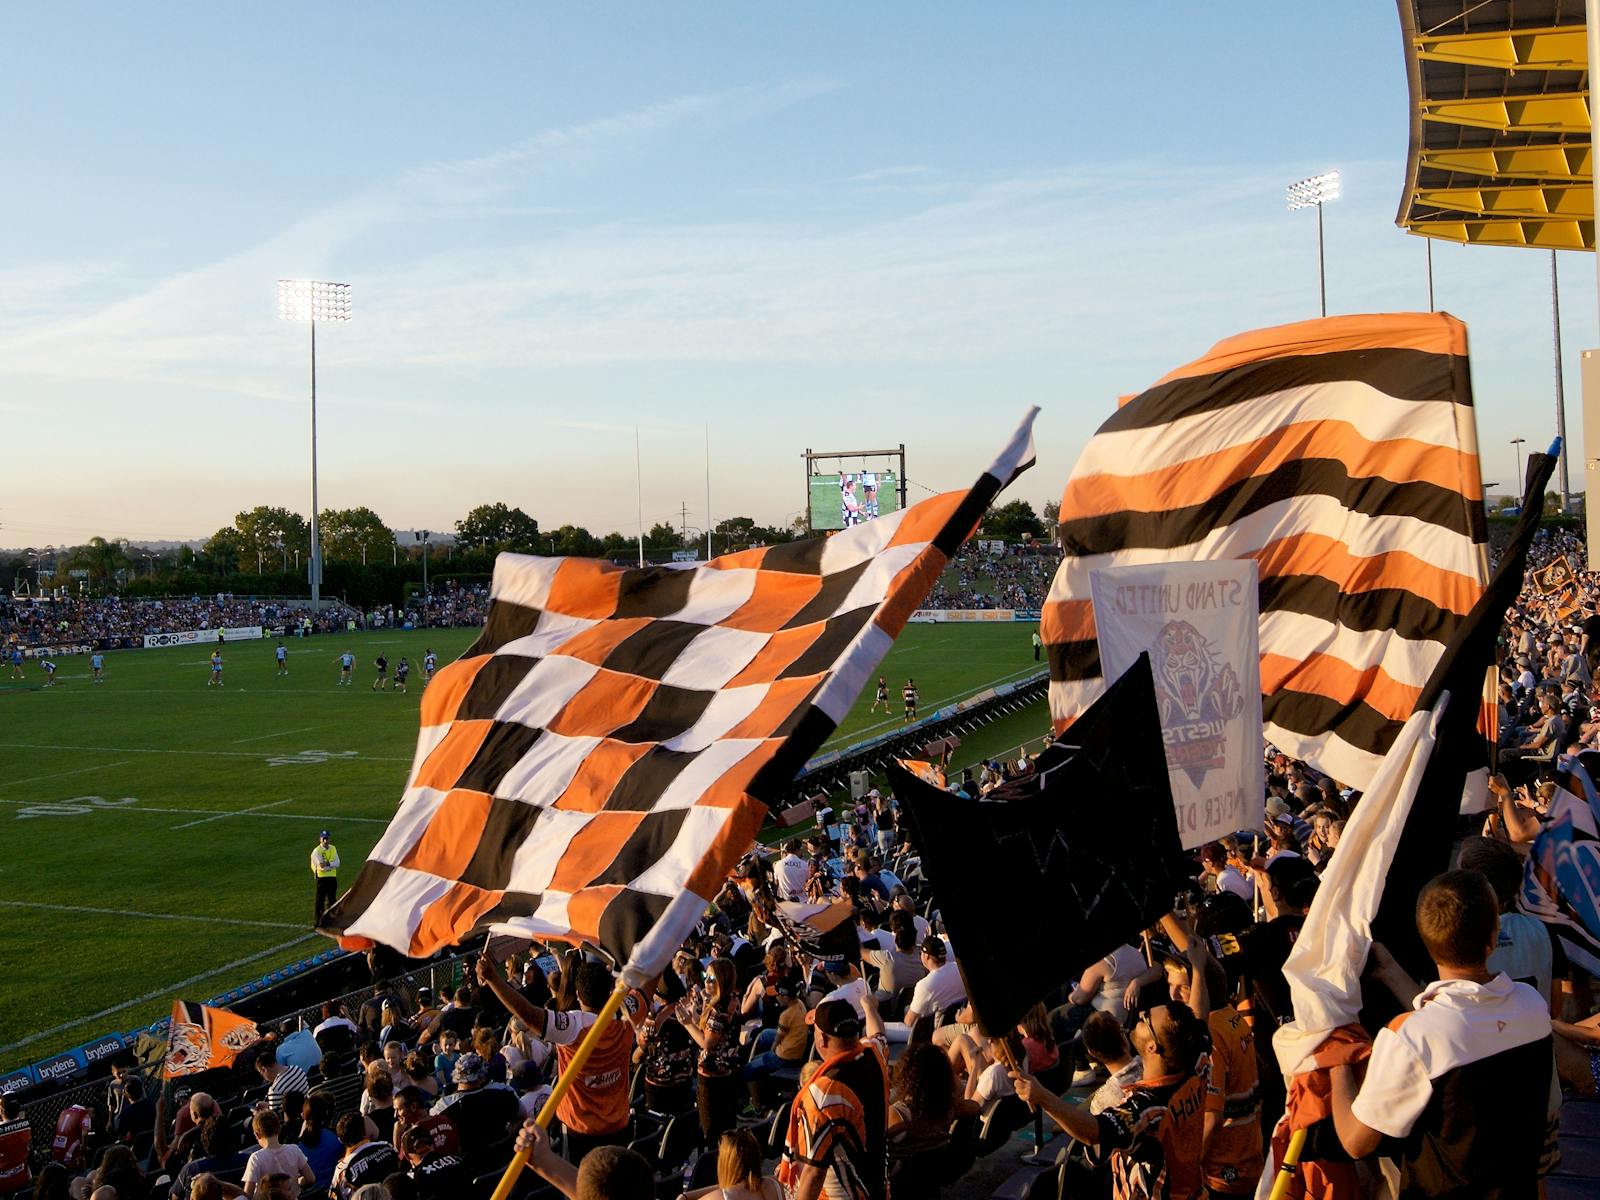 Image for NRL Wests Tigers Games at Campbelltown Stadium